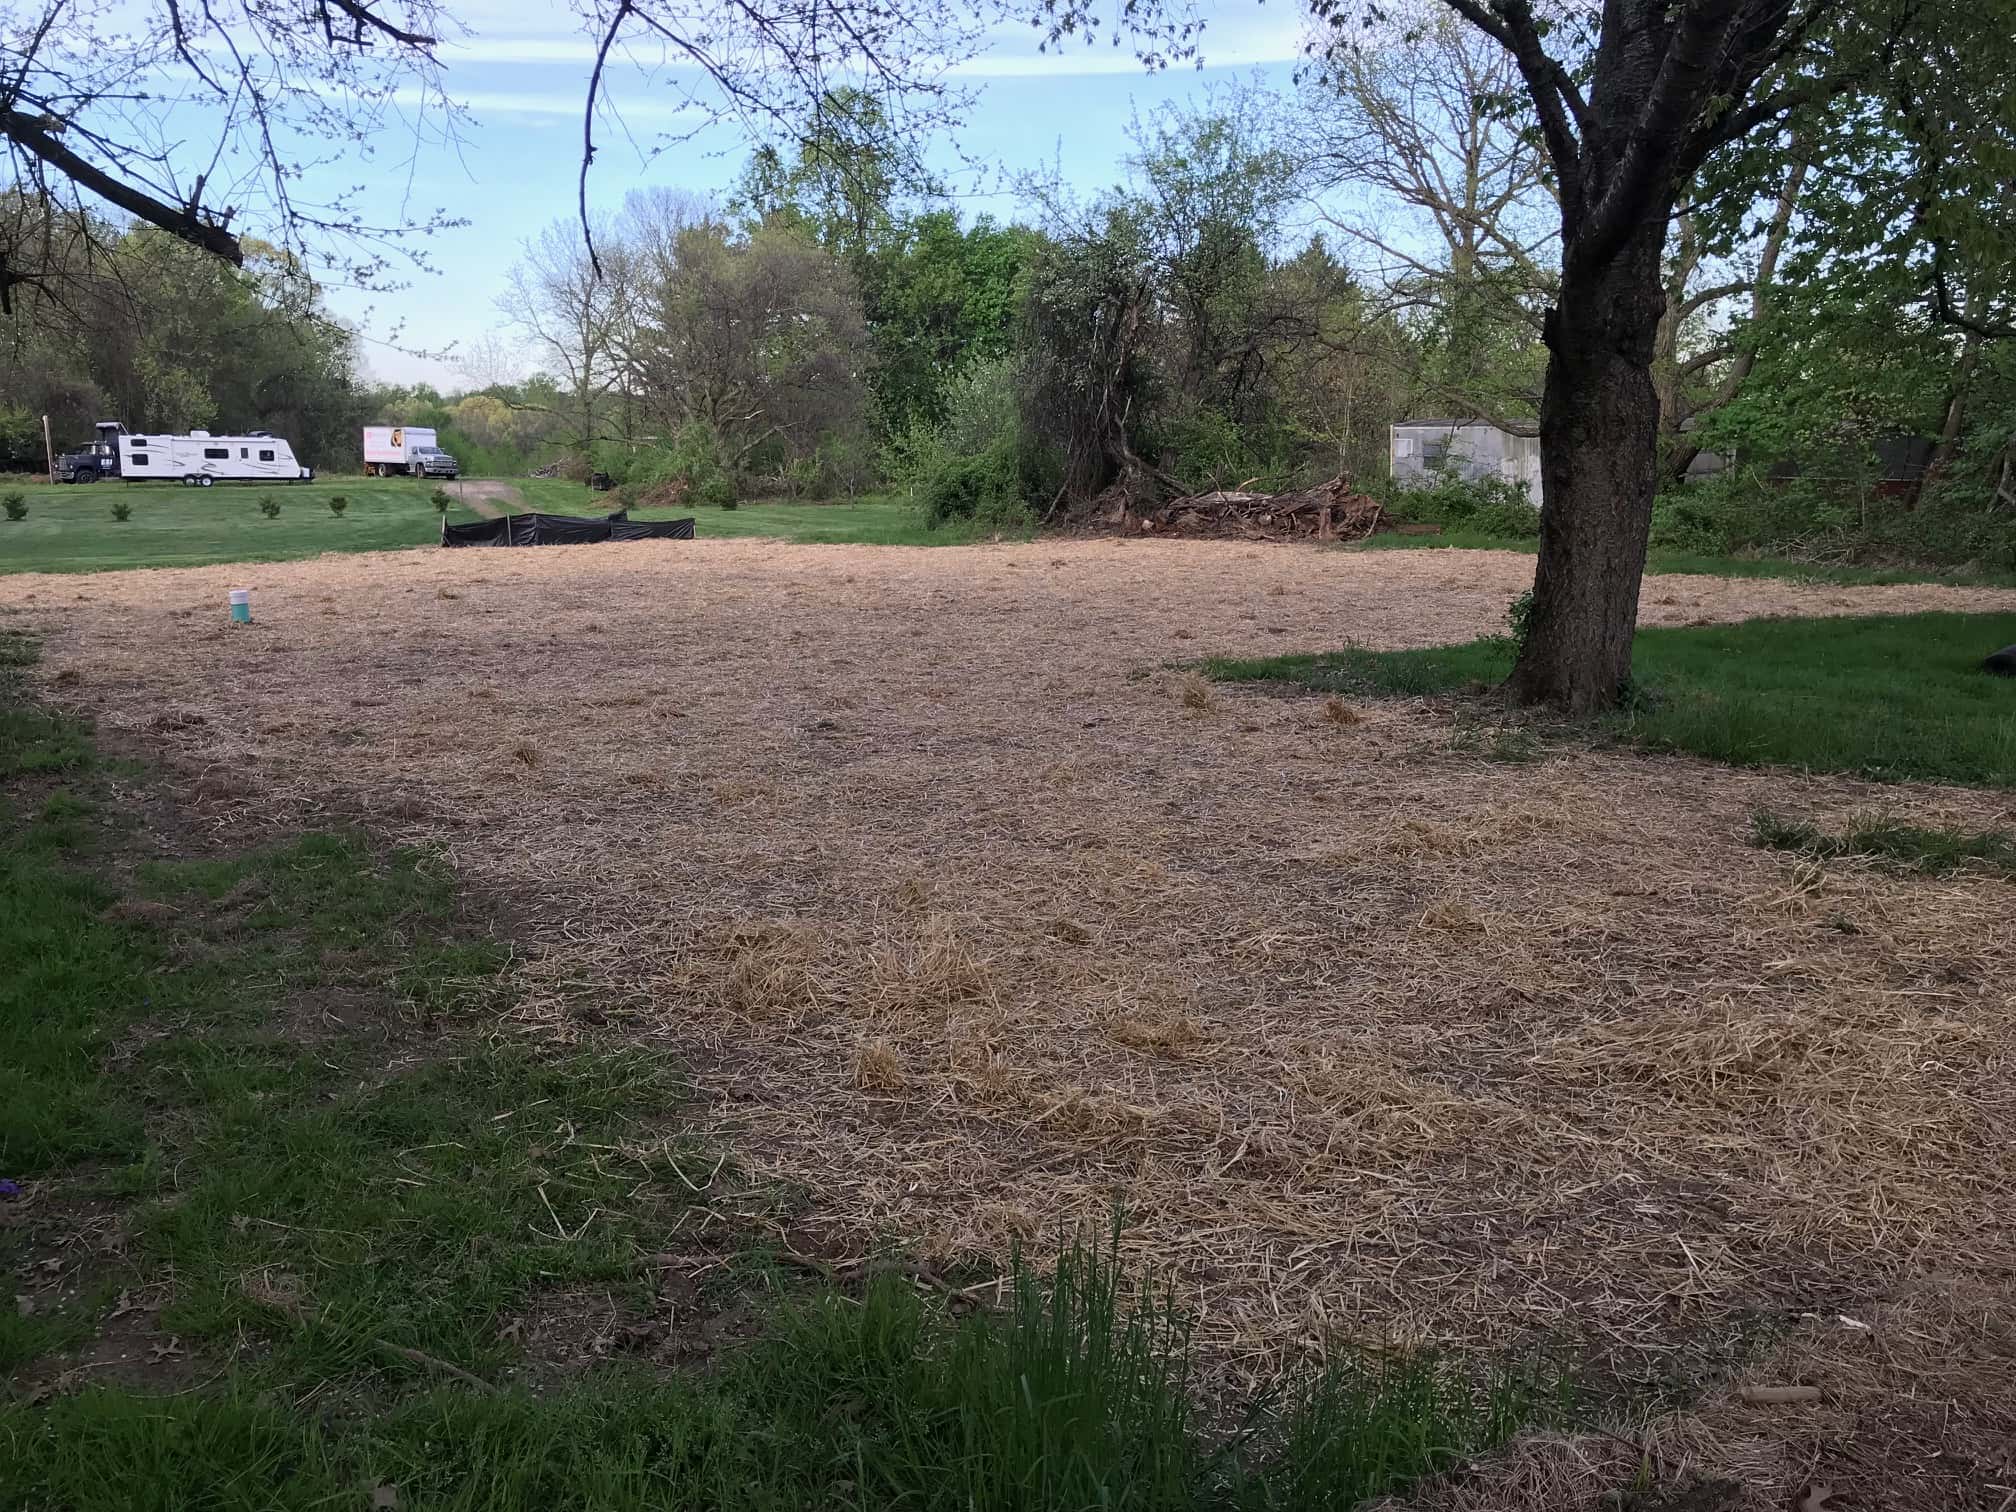 Storm water management areas were seeded and mulched